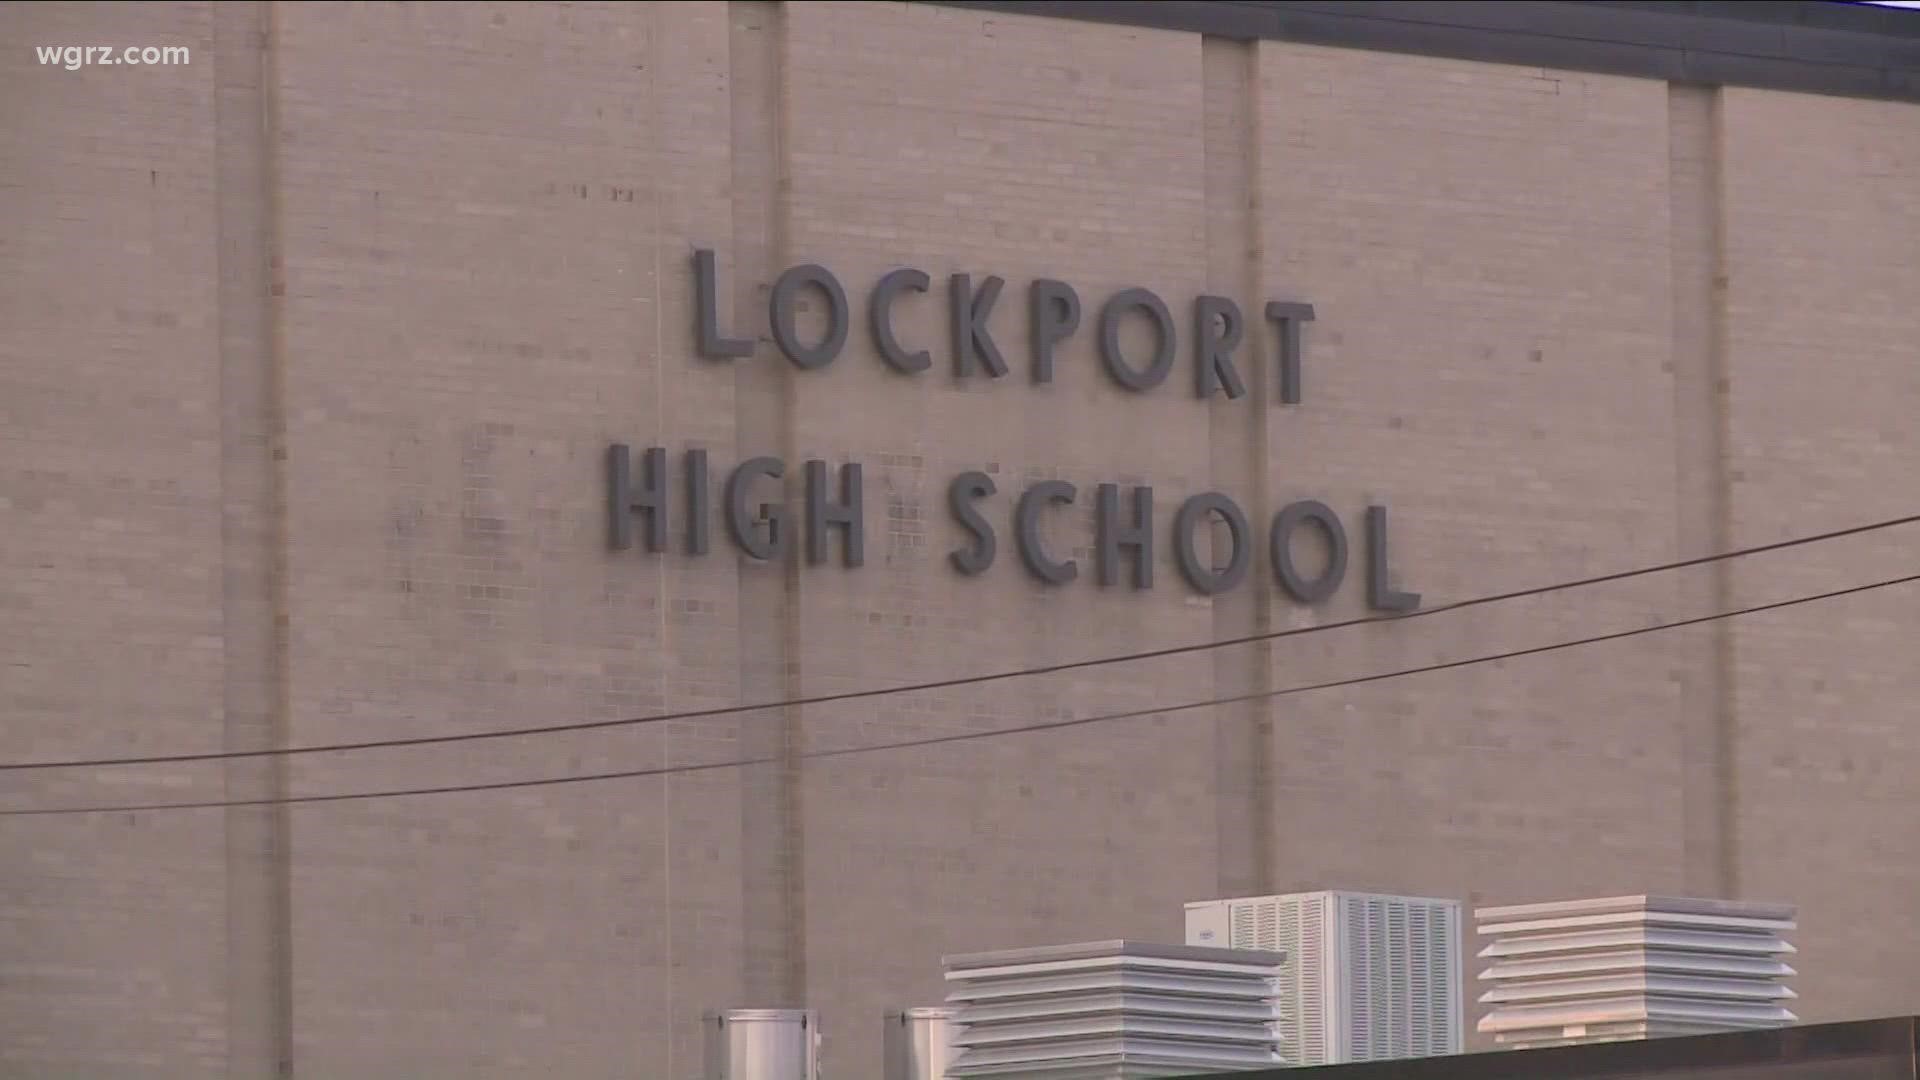 This is the second time in two weeks the district has had to take action in light of a threat.